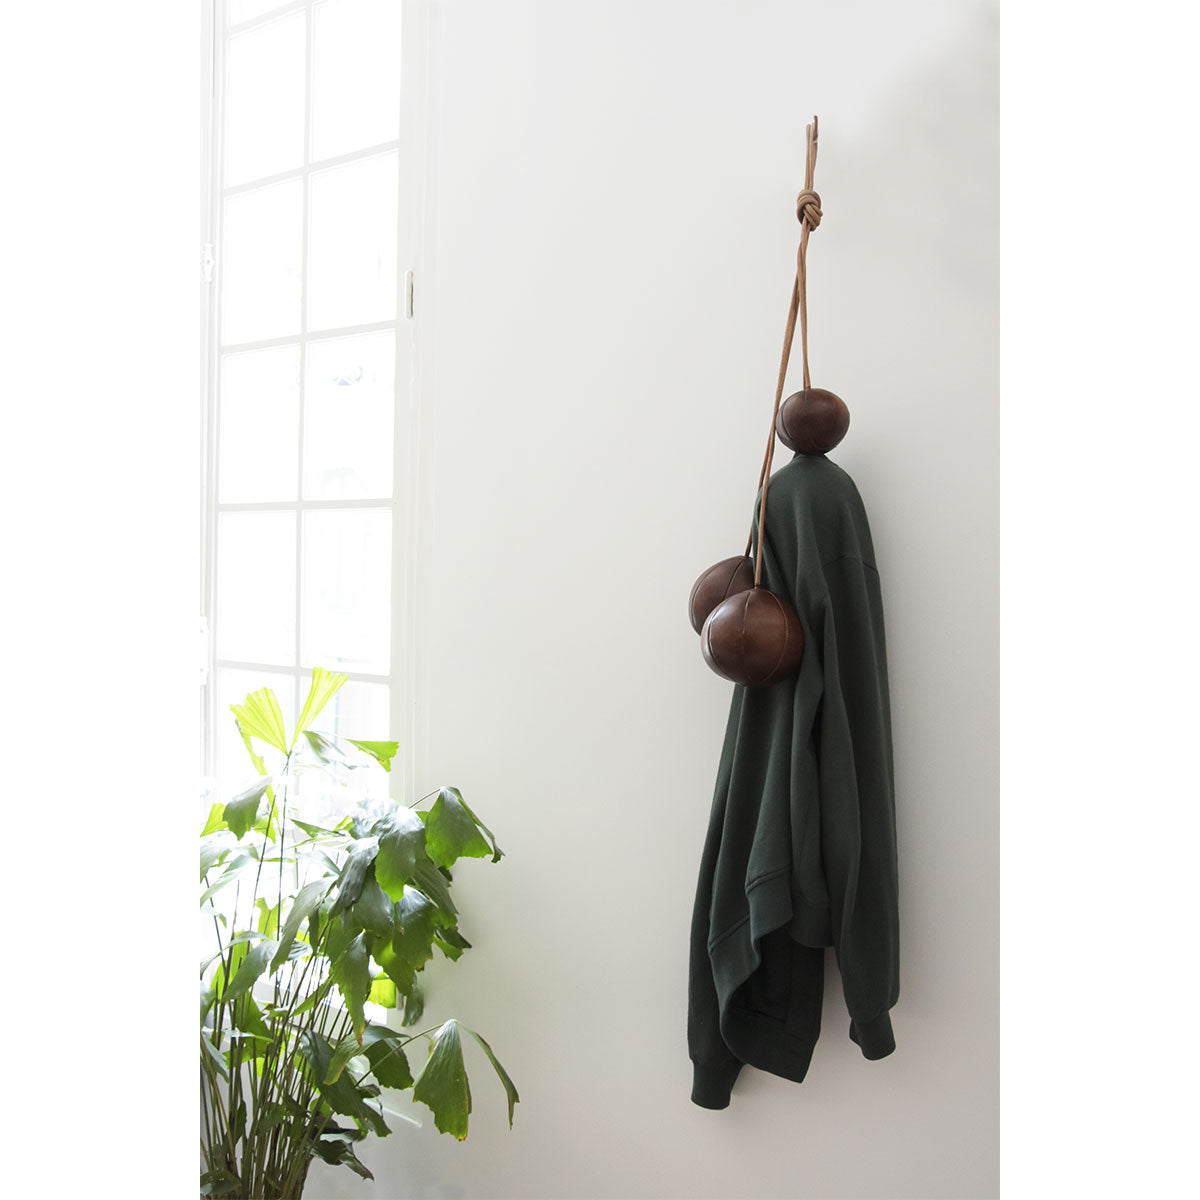 Clothes Rack by ENOstudio